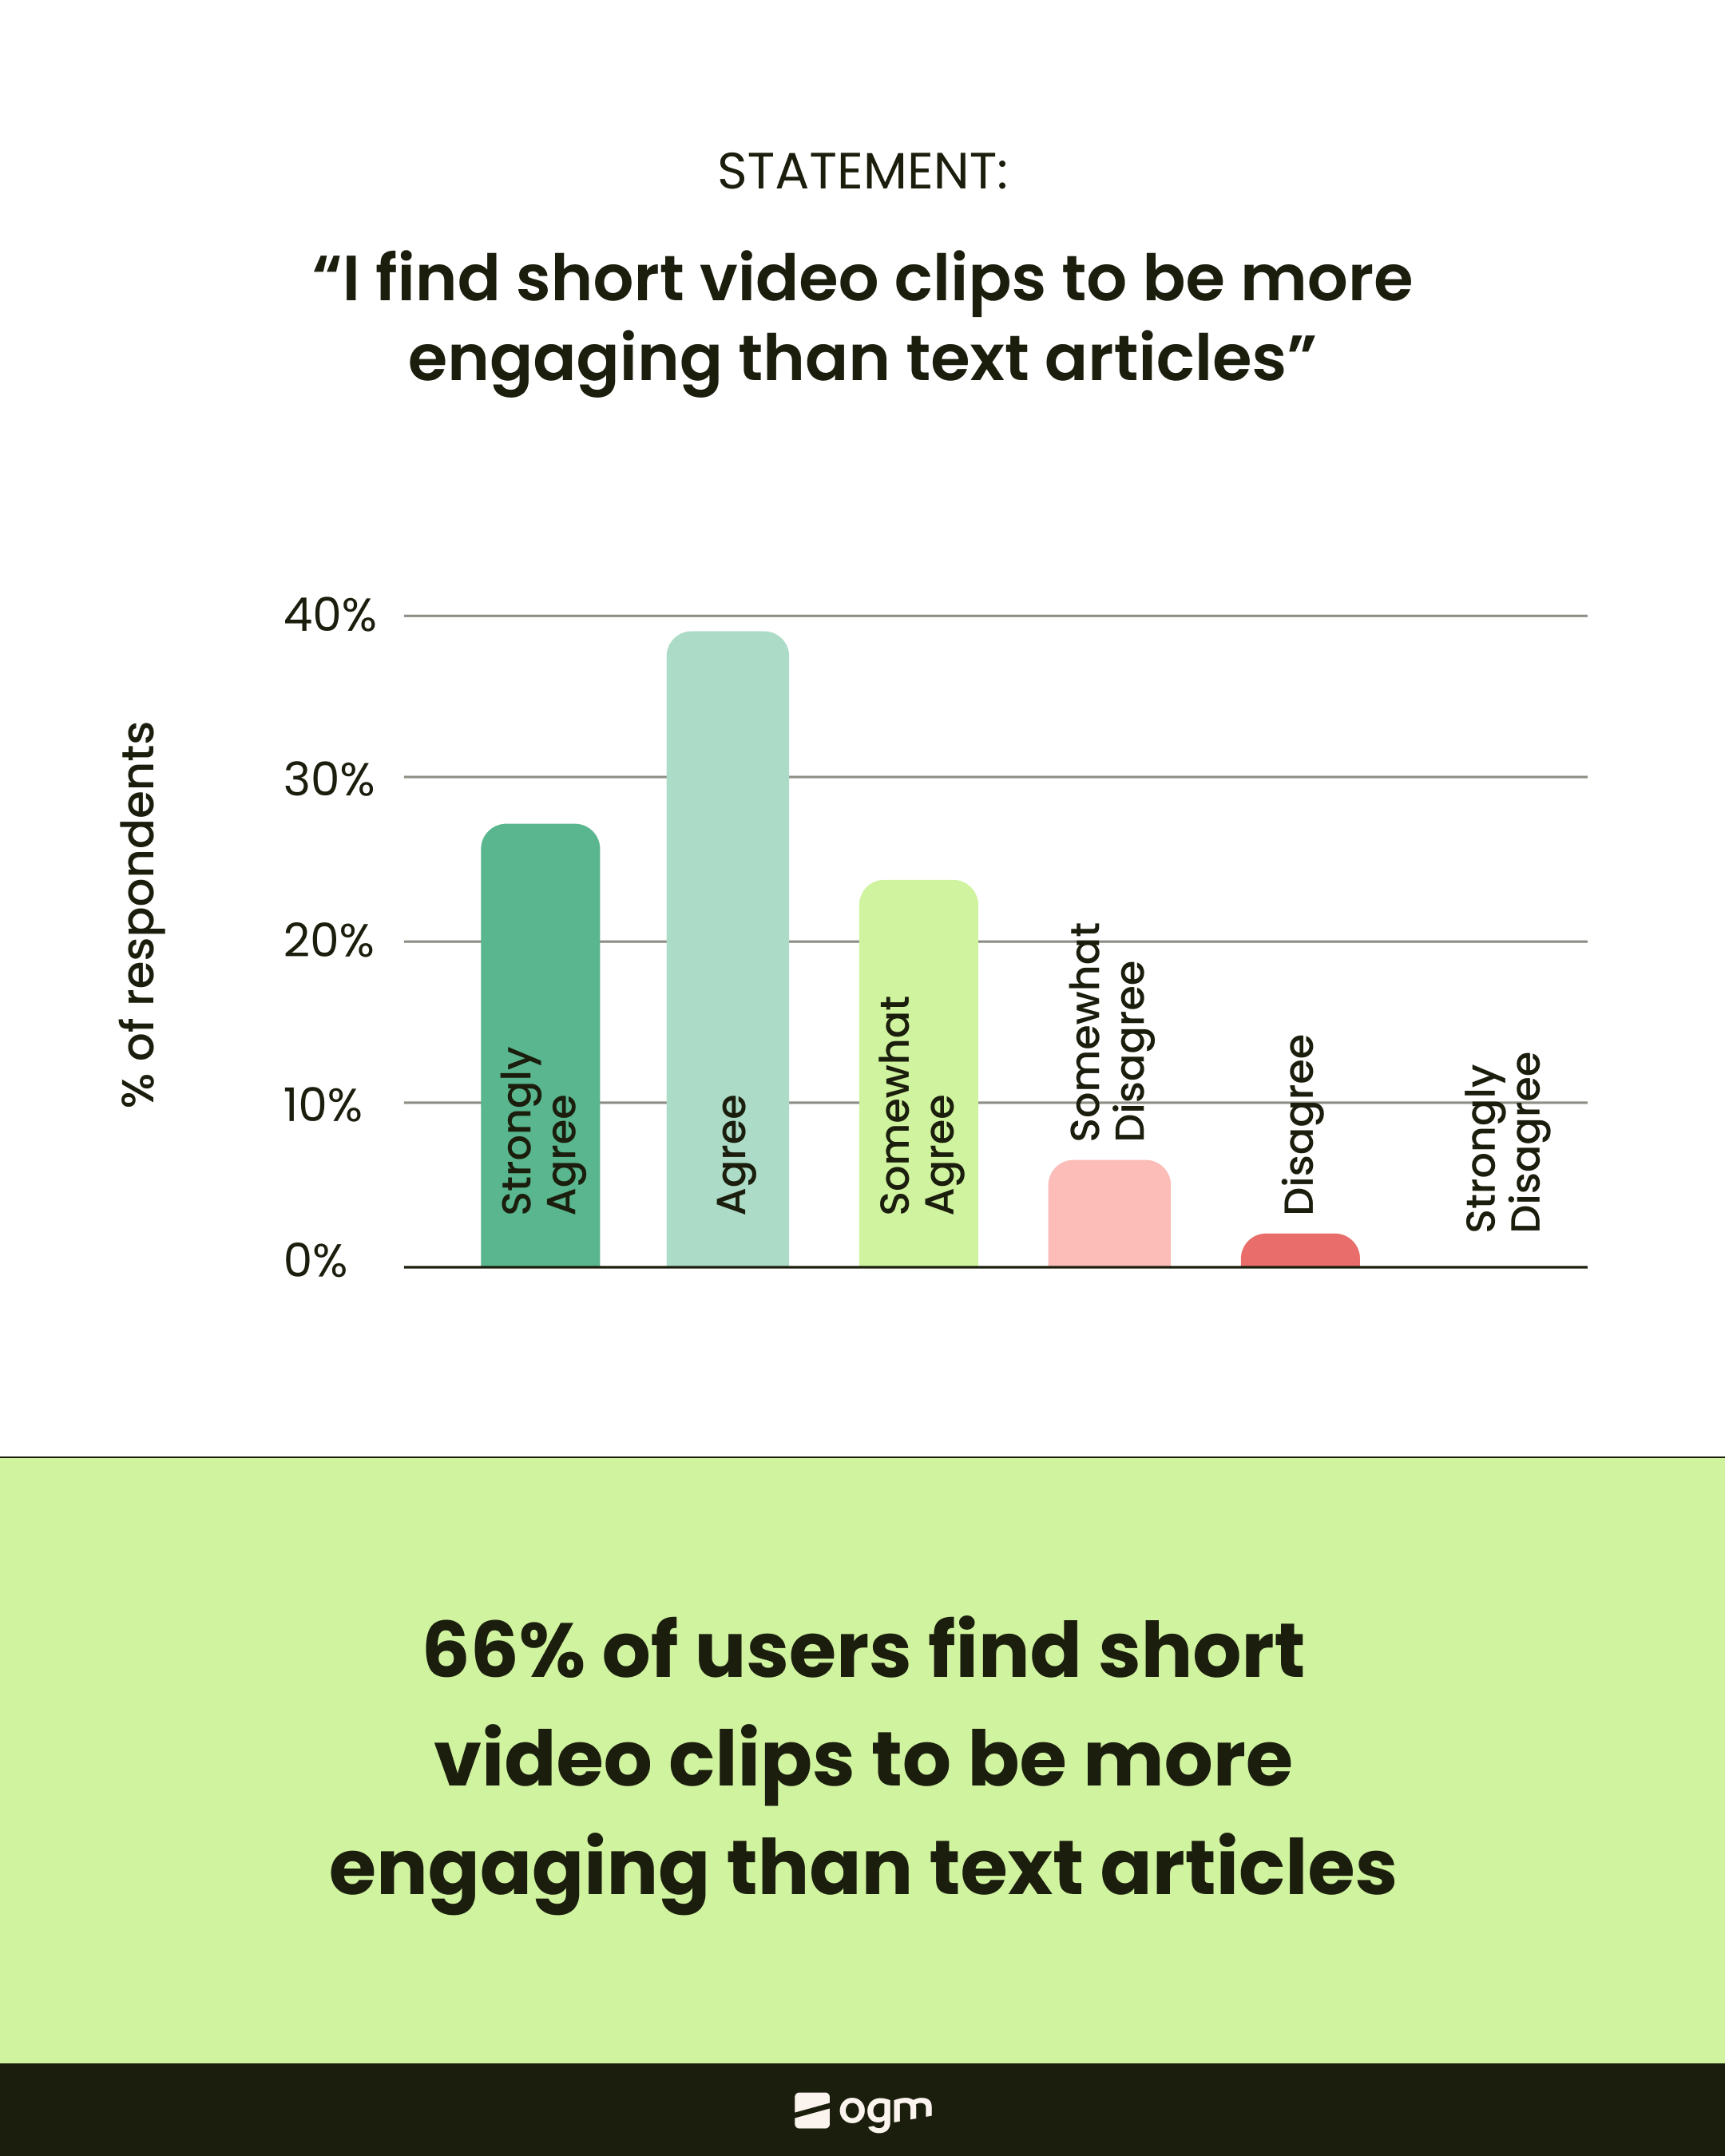 Users are more engaged by short-form videos than text